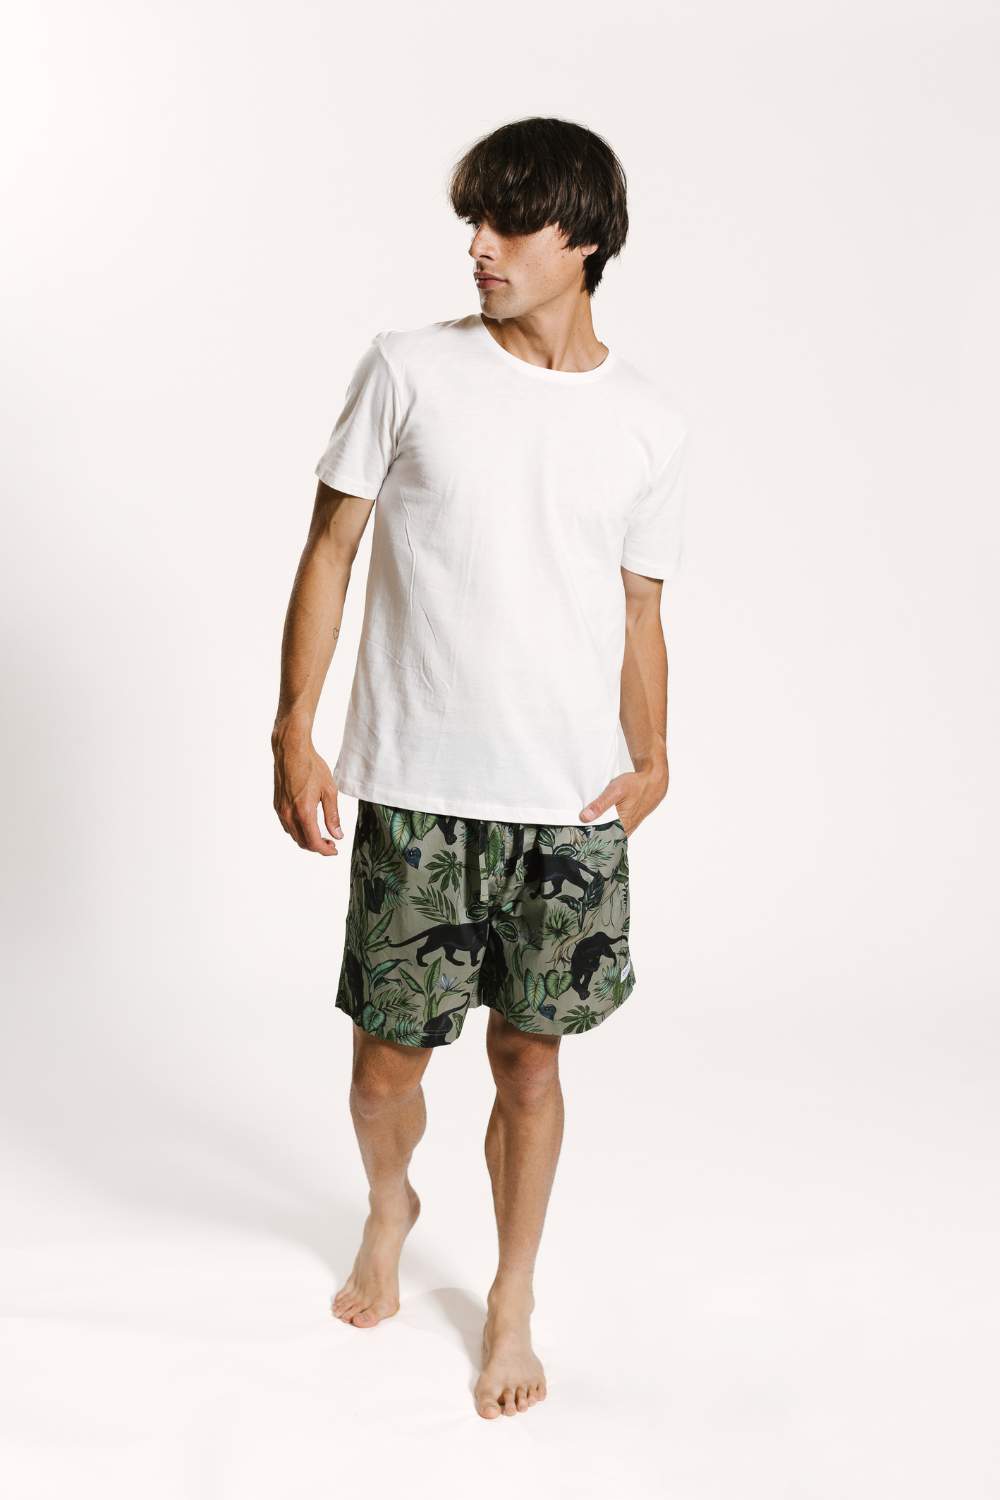 Model wearing mens organic cotton pyjama shorts with a white cotton tee